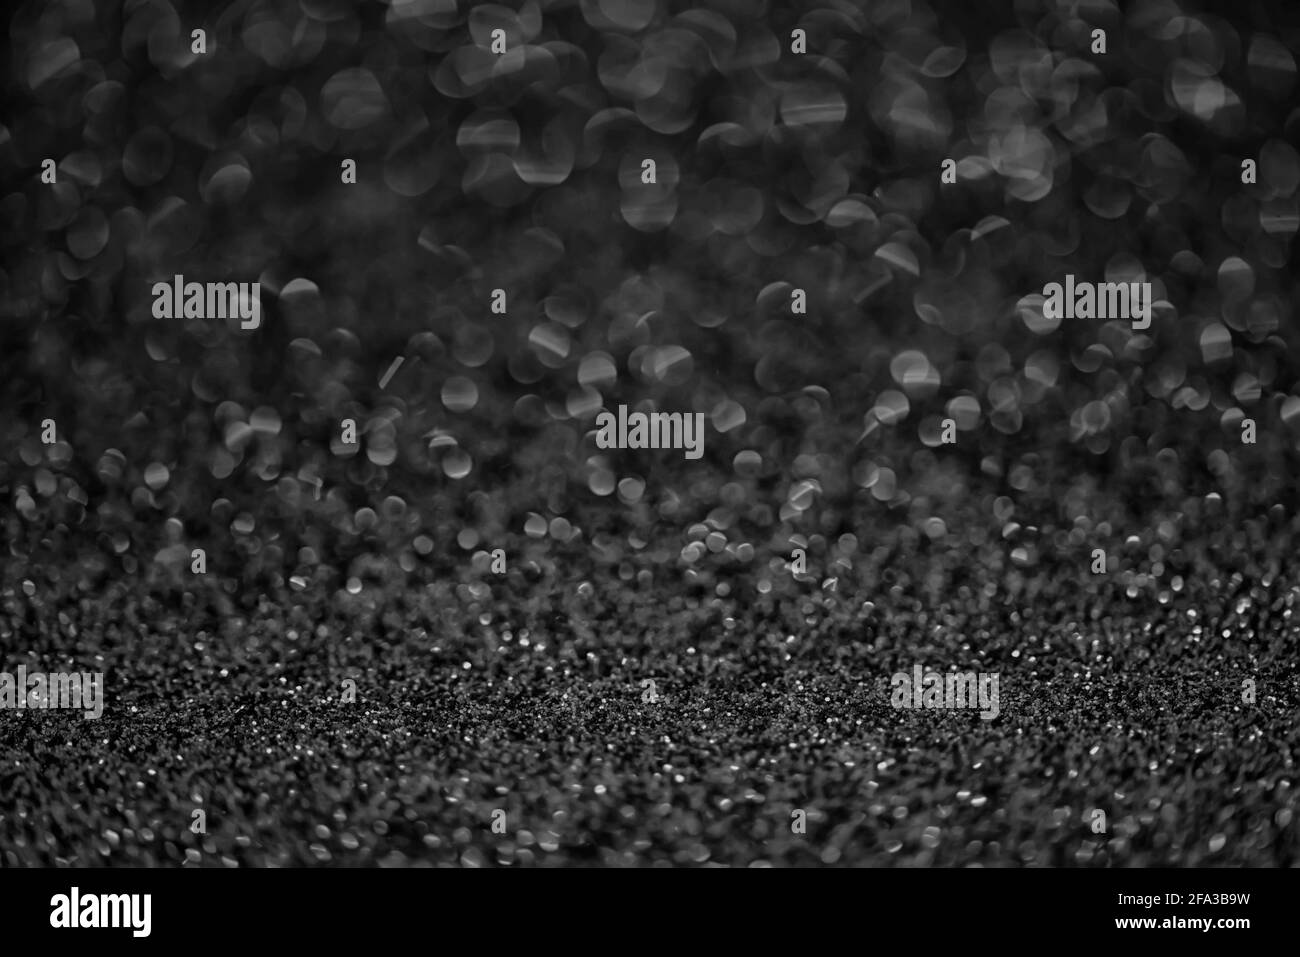 Abstract background glitter snow on black surface Stock Photo - Alamy